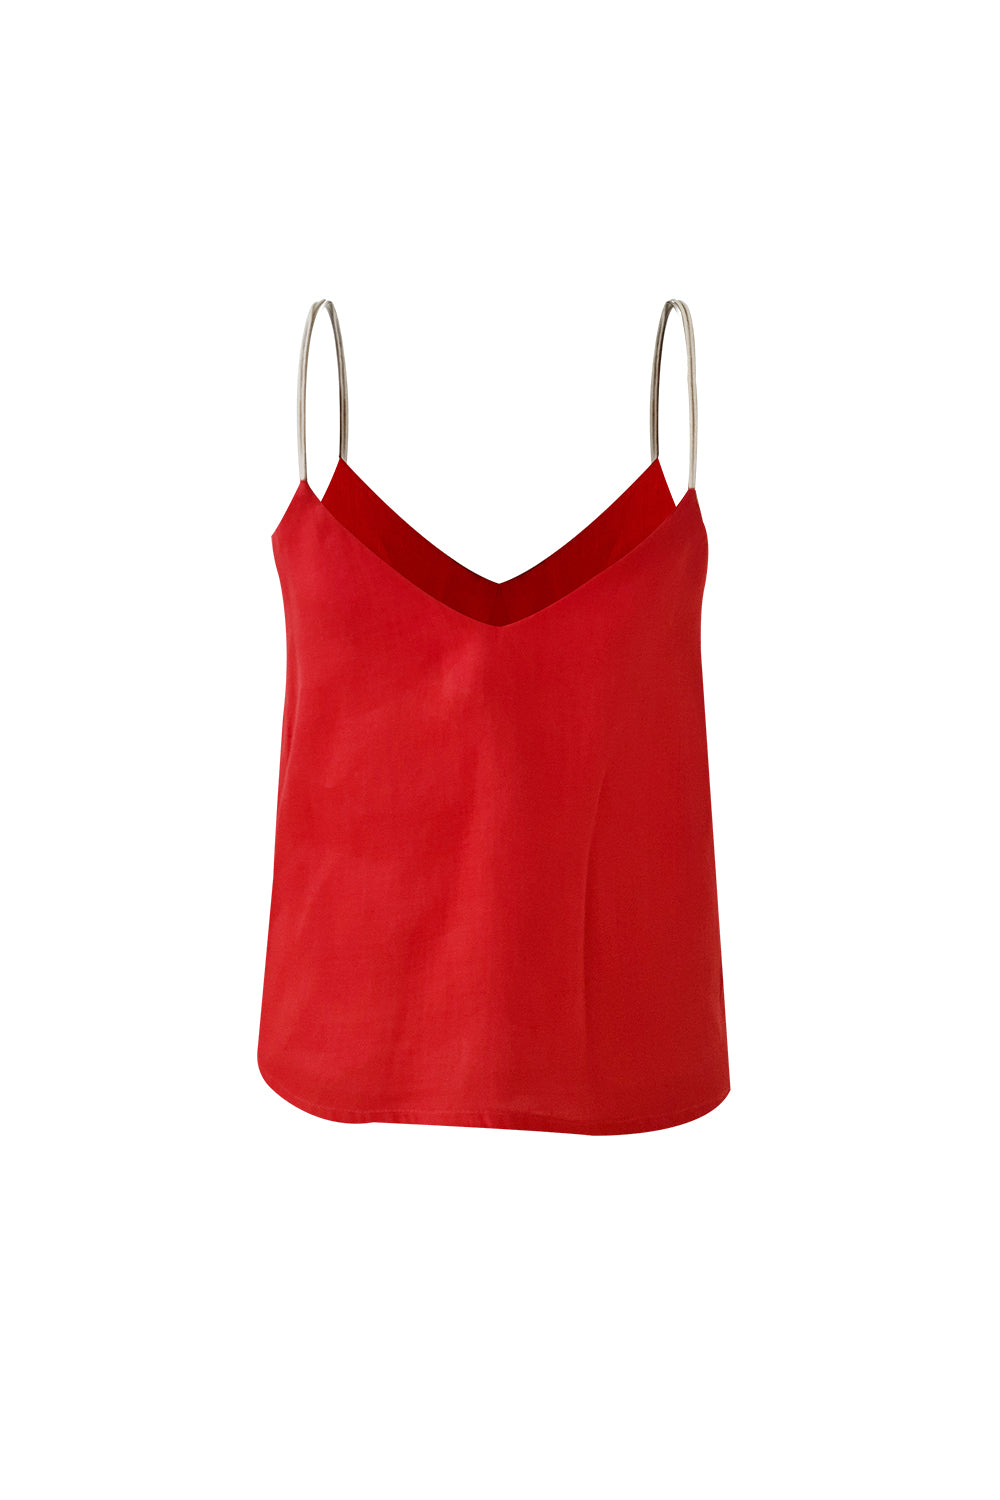 Nascencia Red Blouse